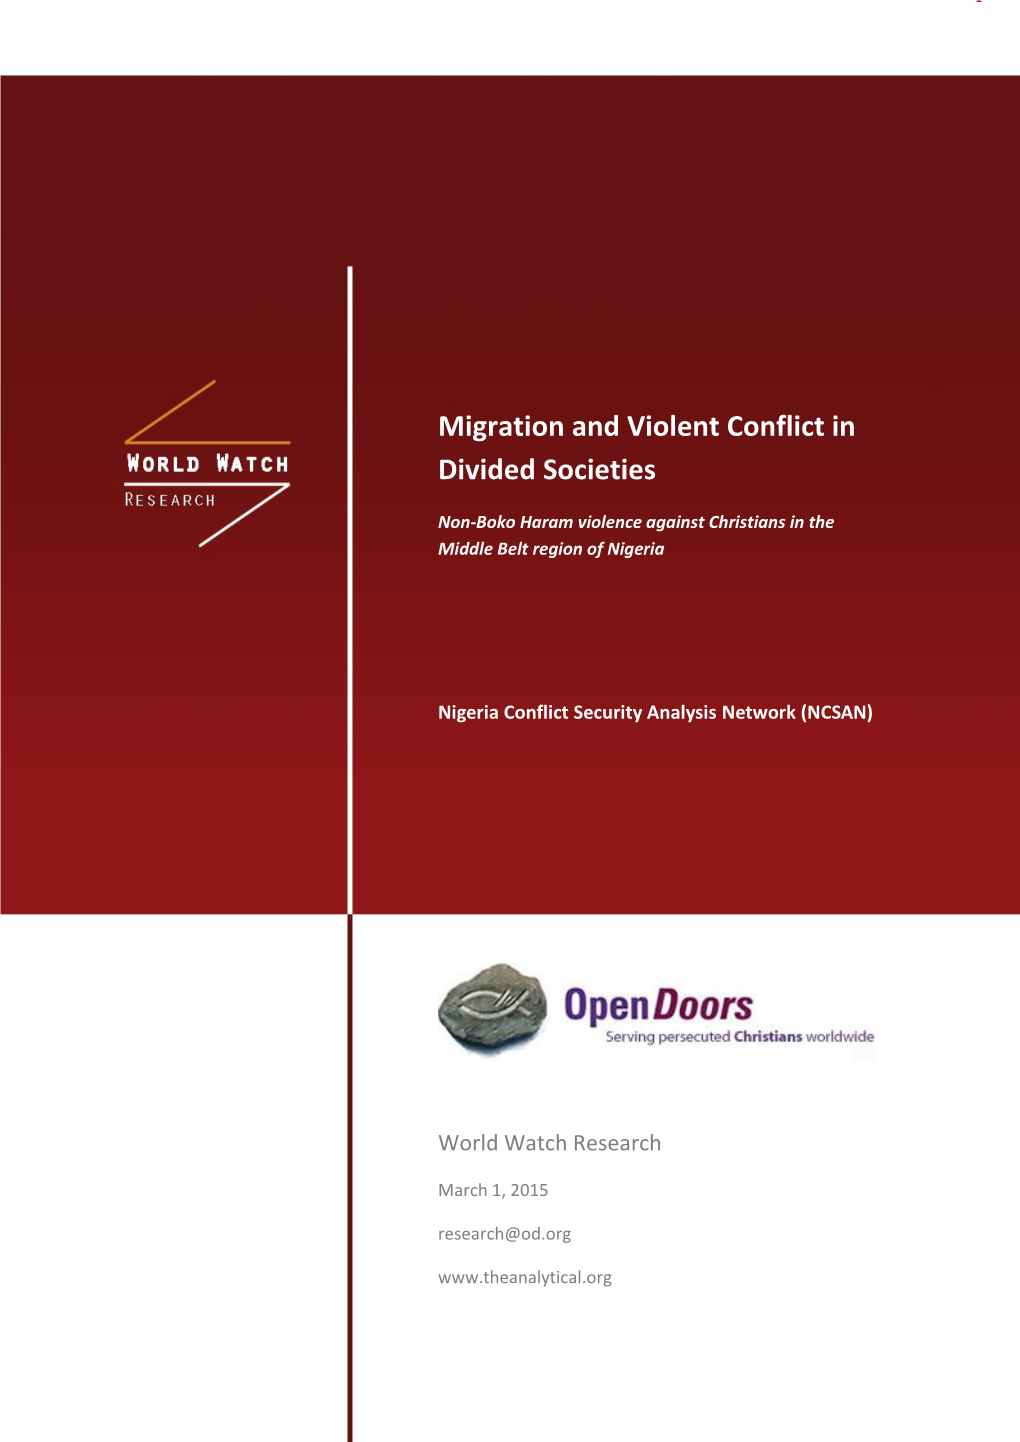 Migration and Violent Conflict in Divided Societies